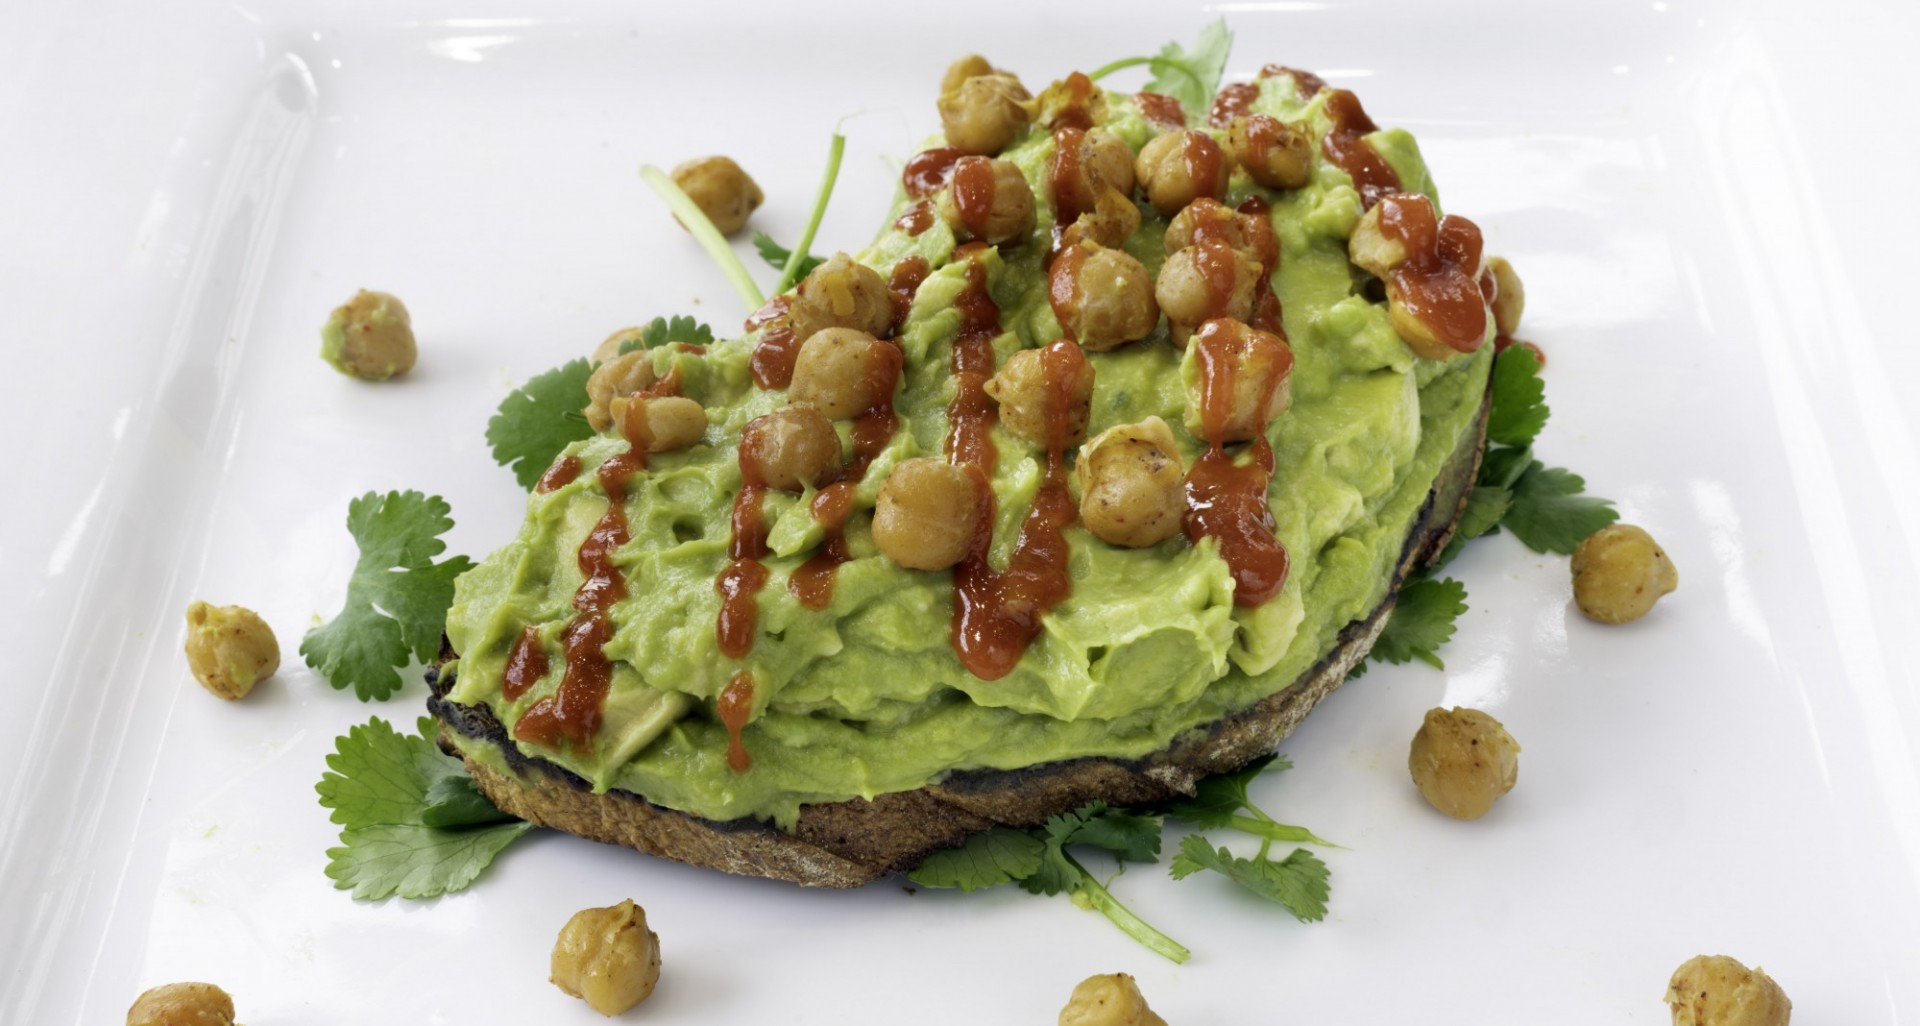 Avocado Toast with Chickpeas and Hot Sauce on Top